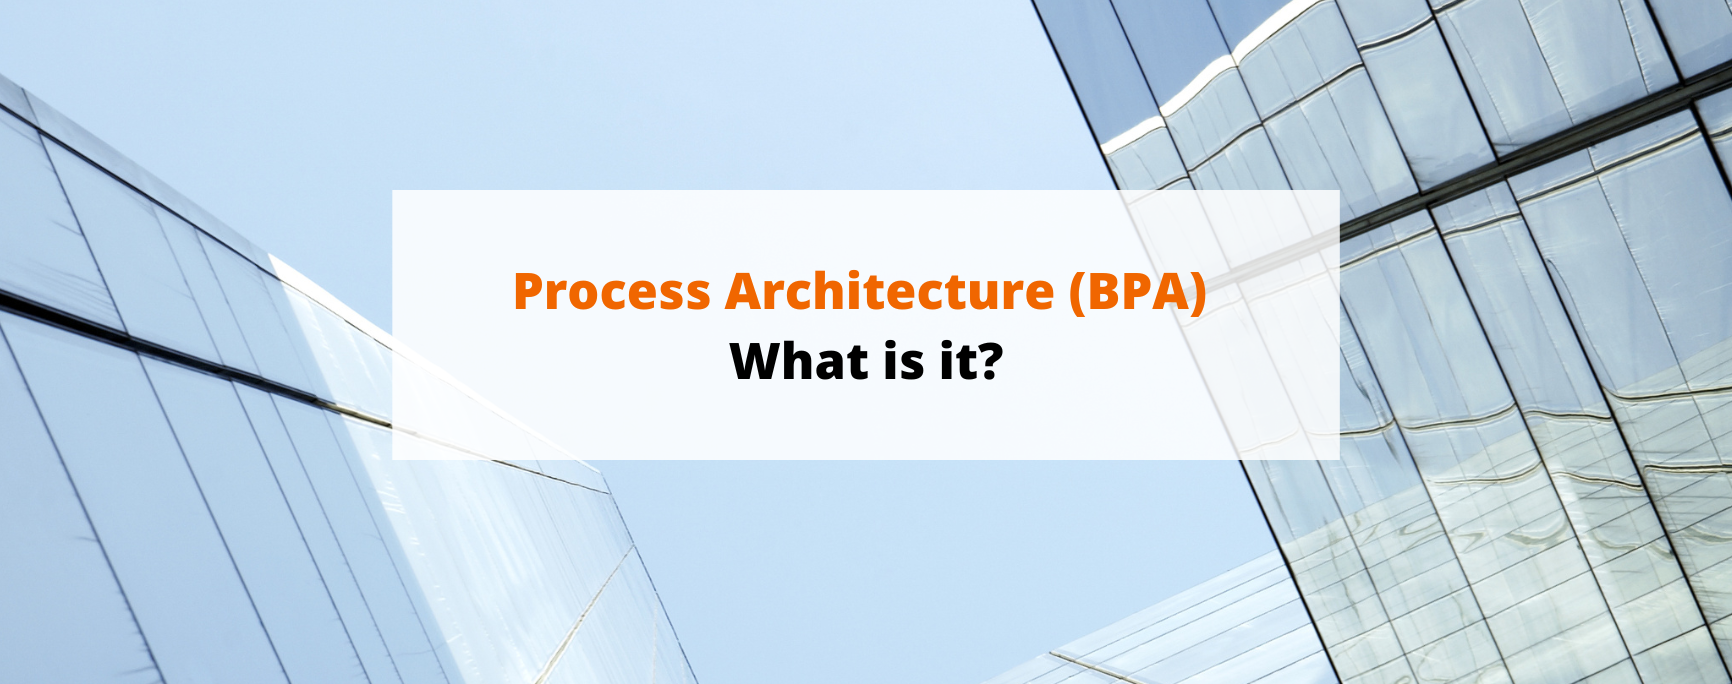 Process Architecture (BPA) What is it